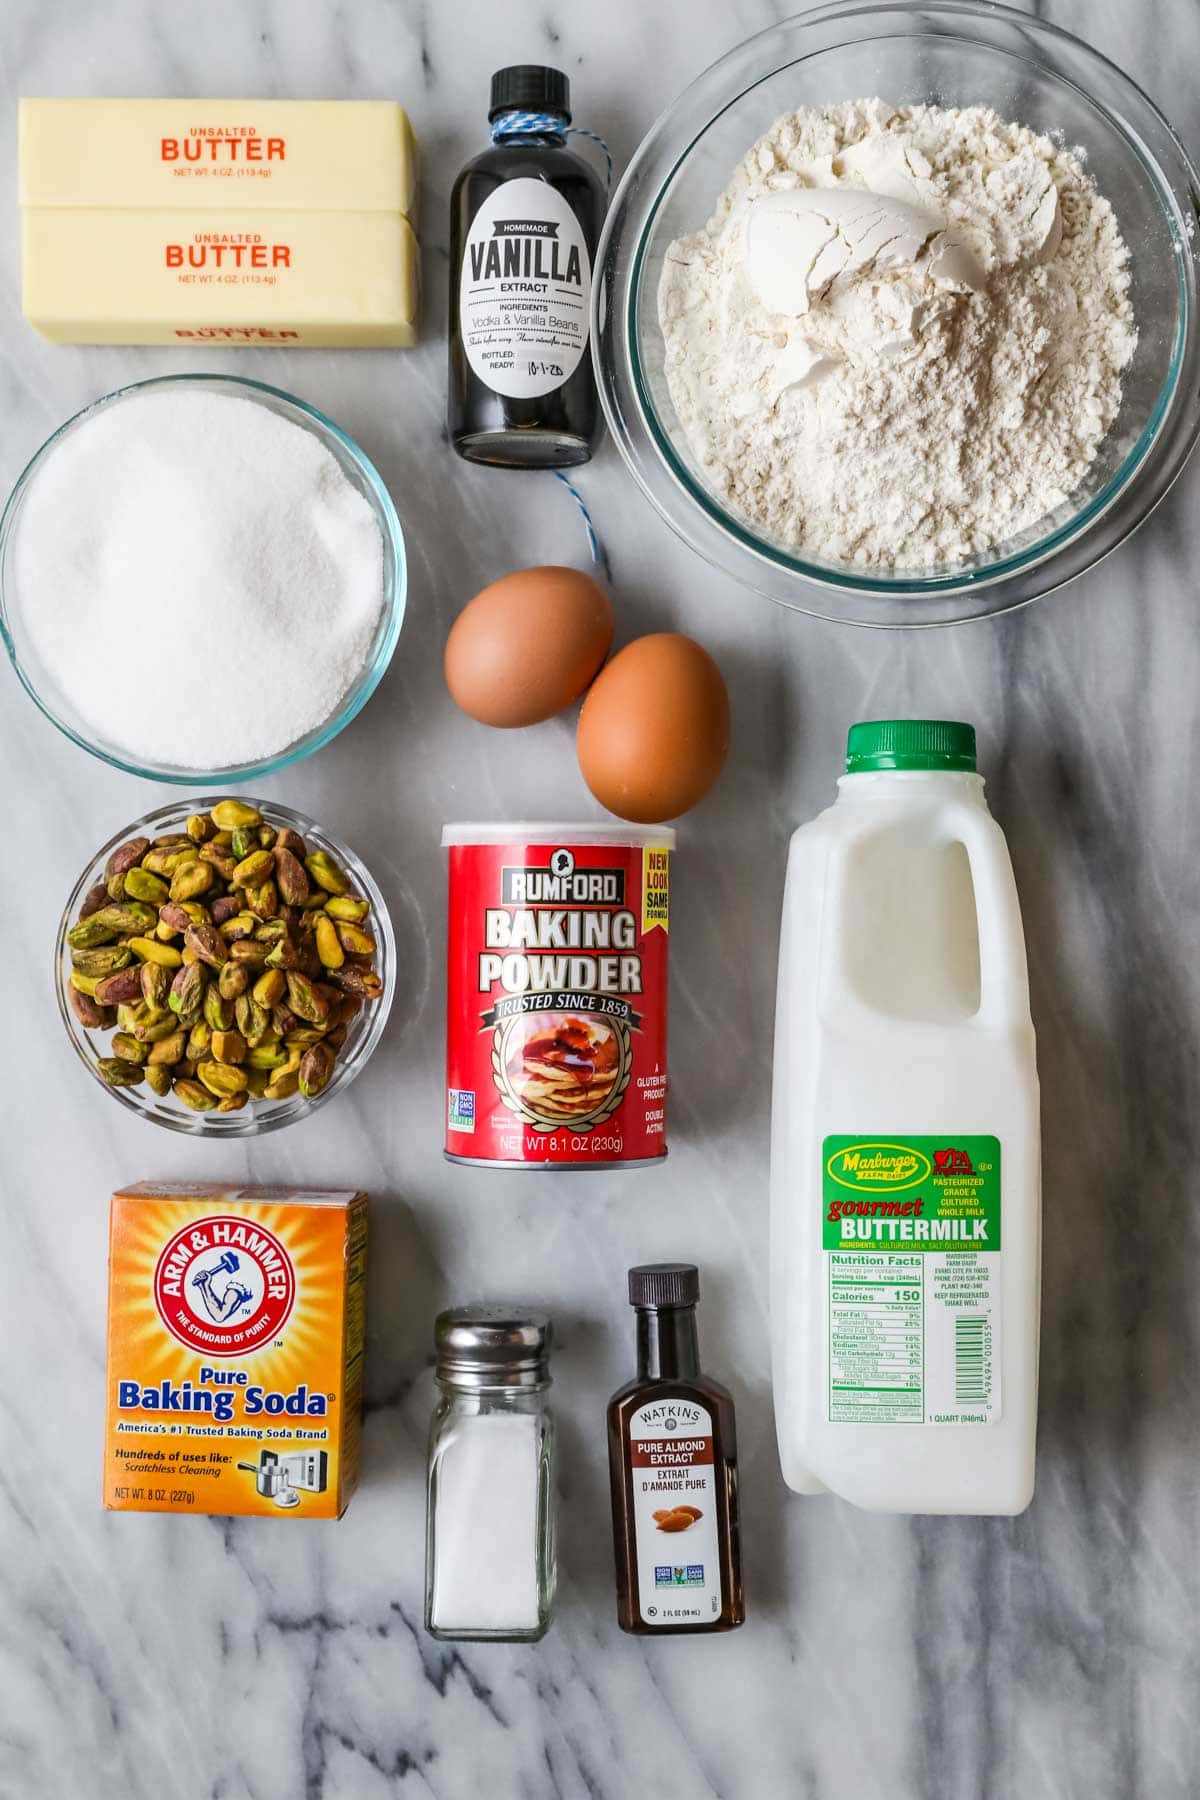 Overhead view of ingredients including buttermilk, pistachios, almond extract, and more.